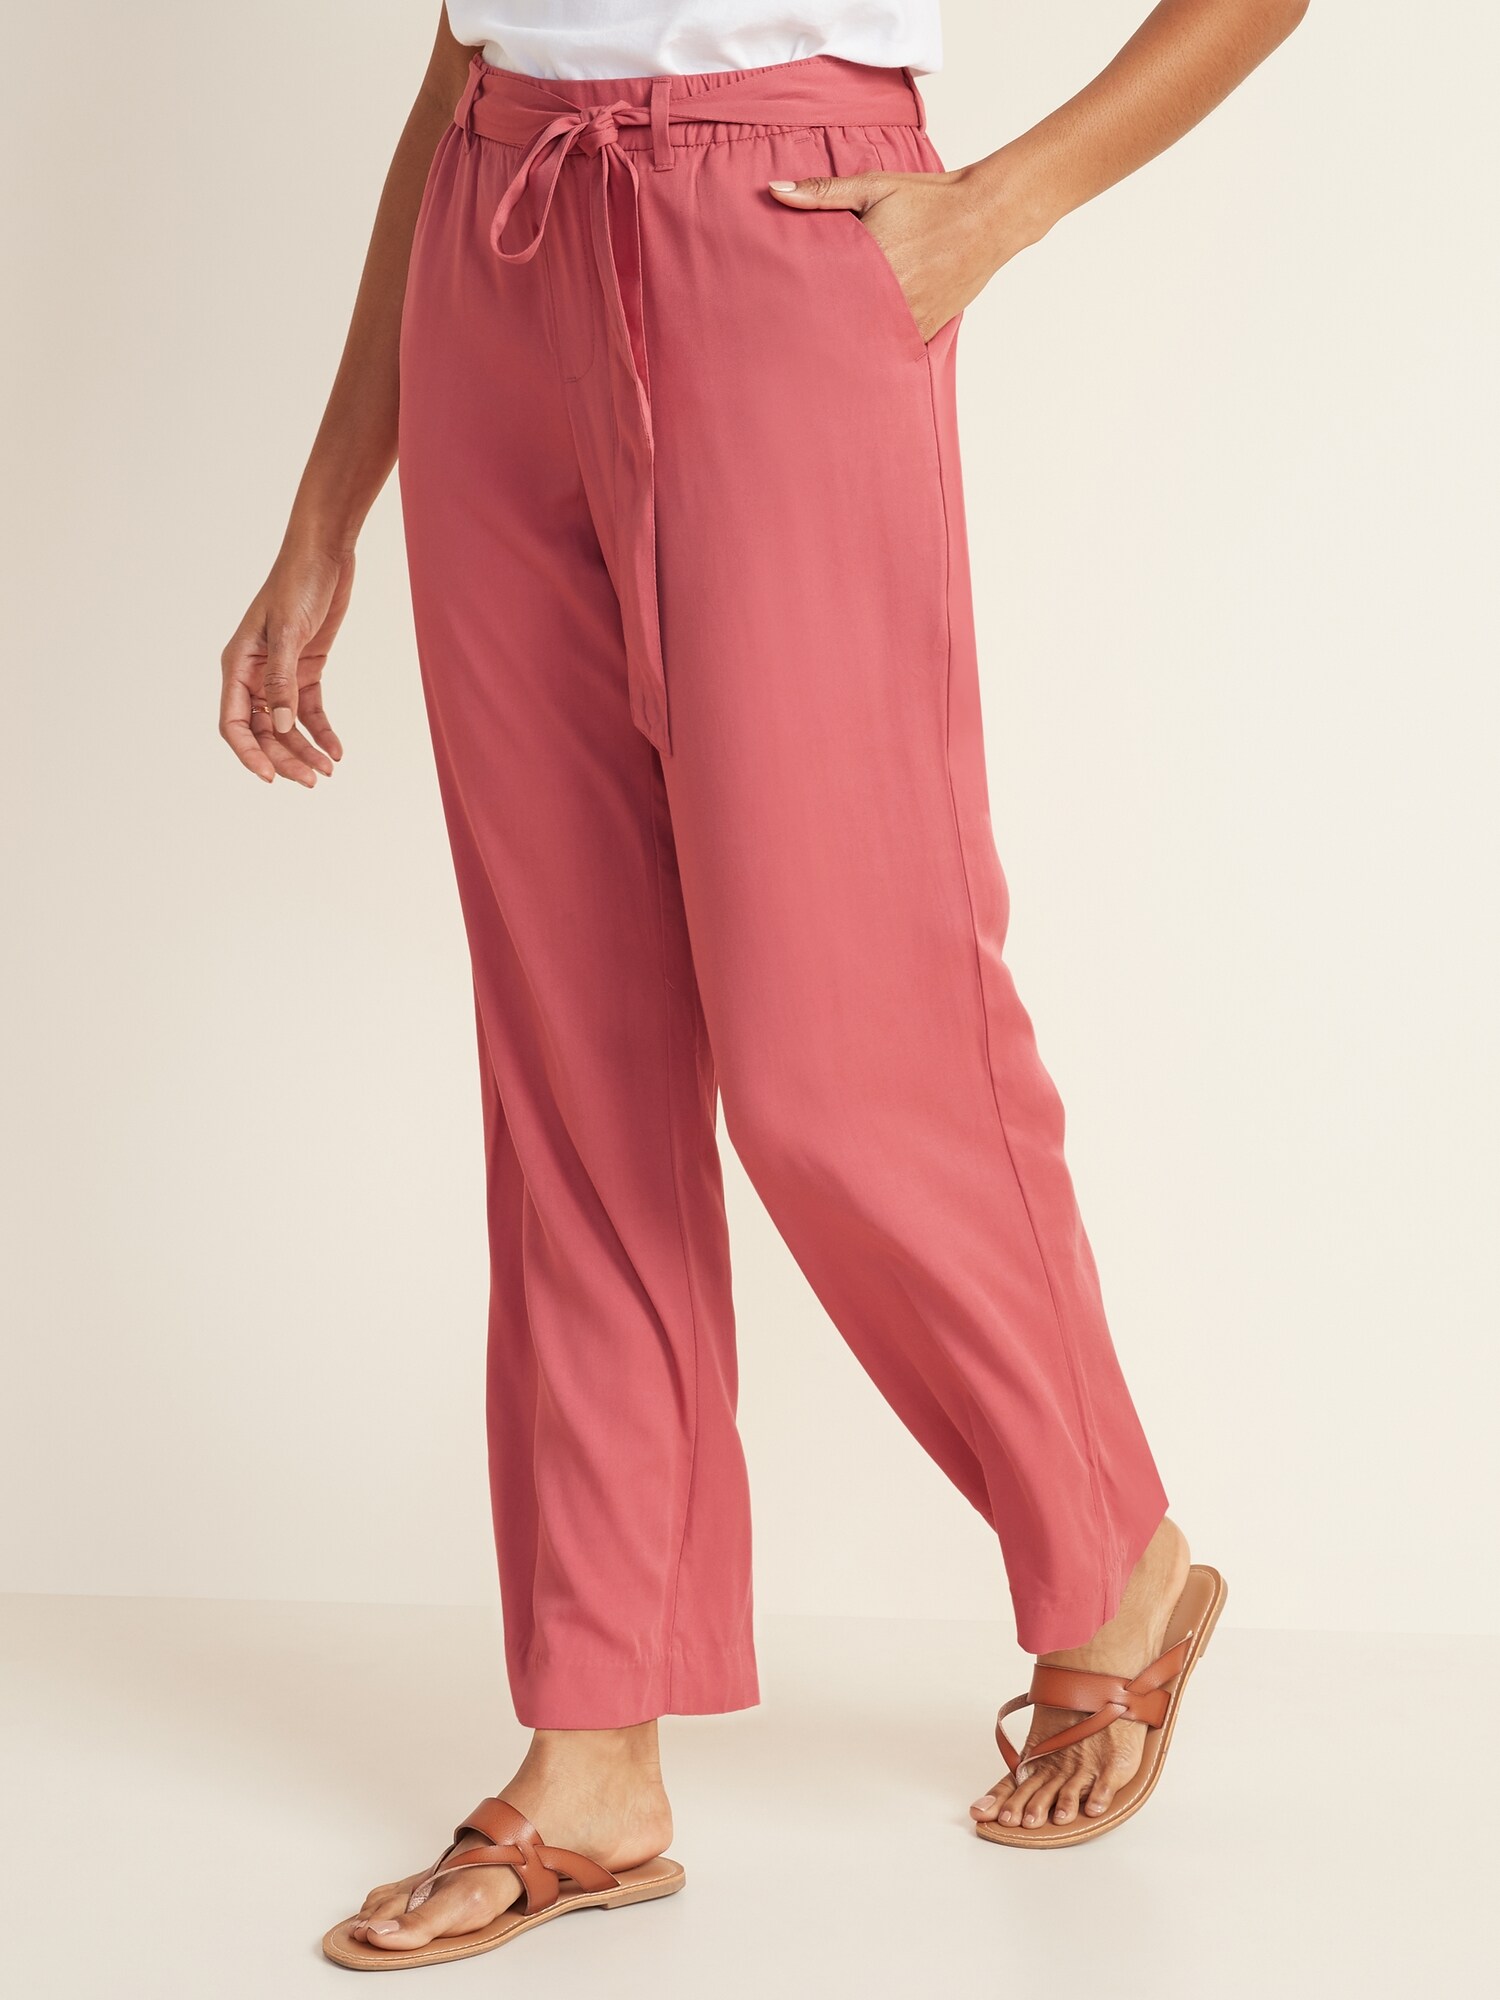 Mid-Rise Soft Pants for Women | Old Navy